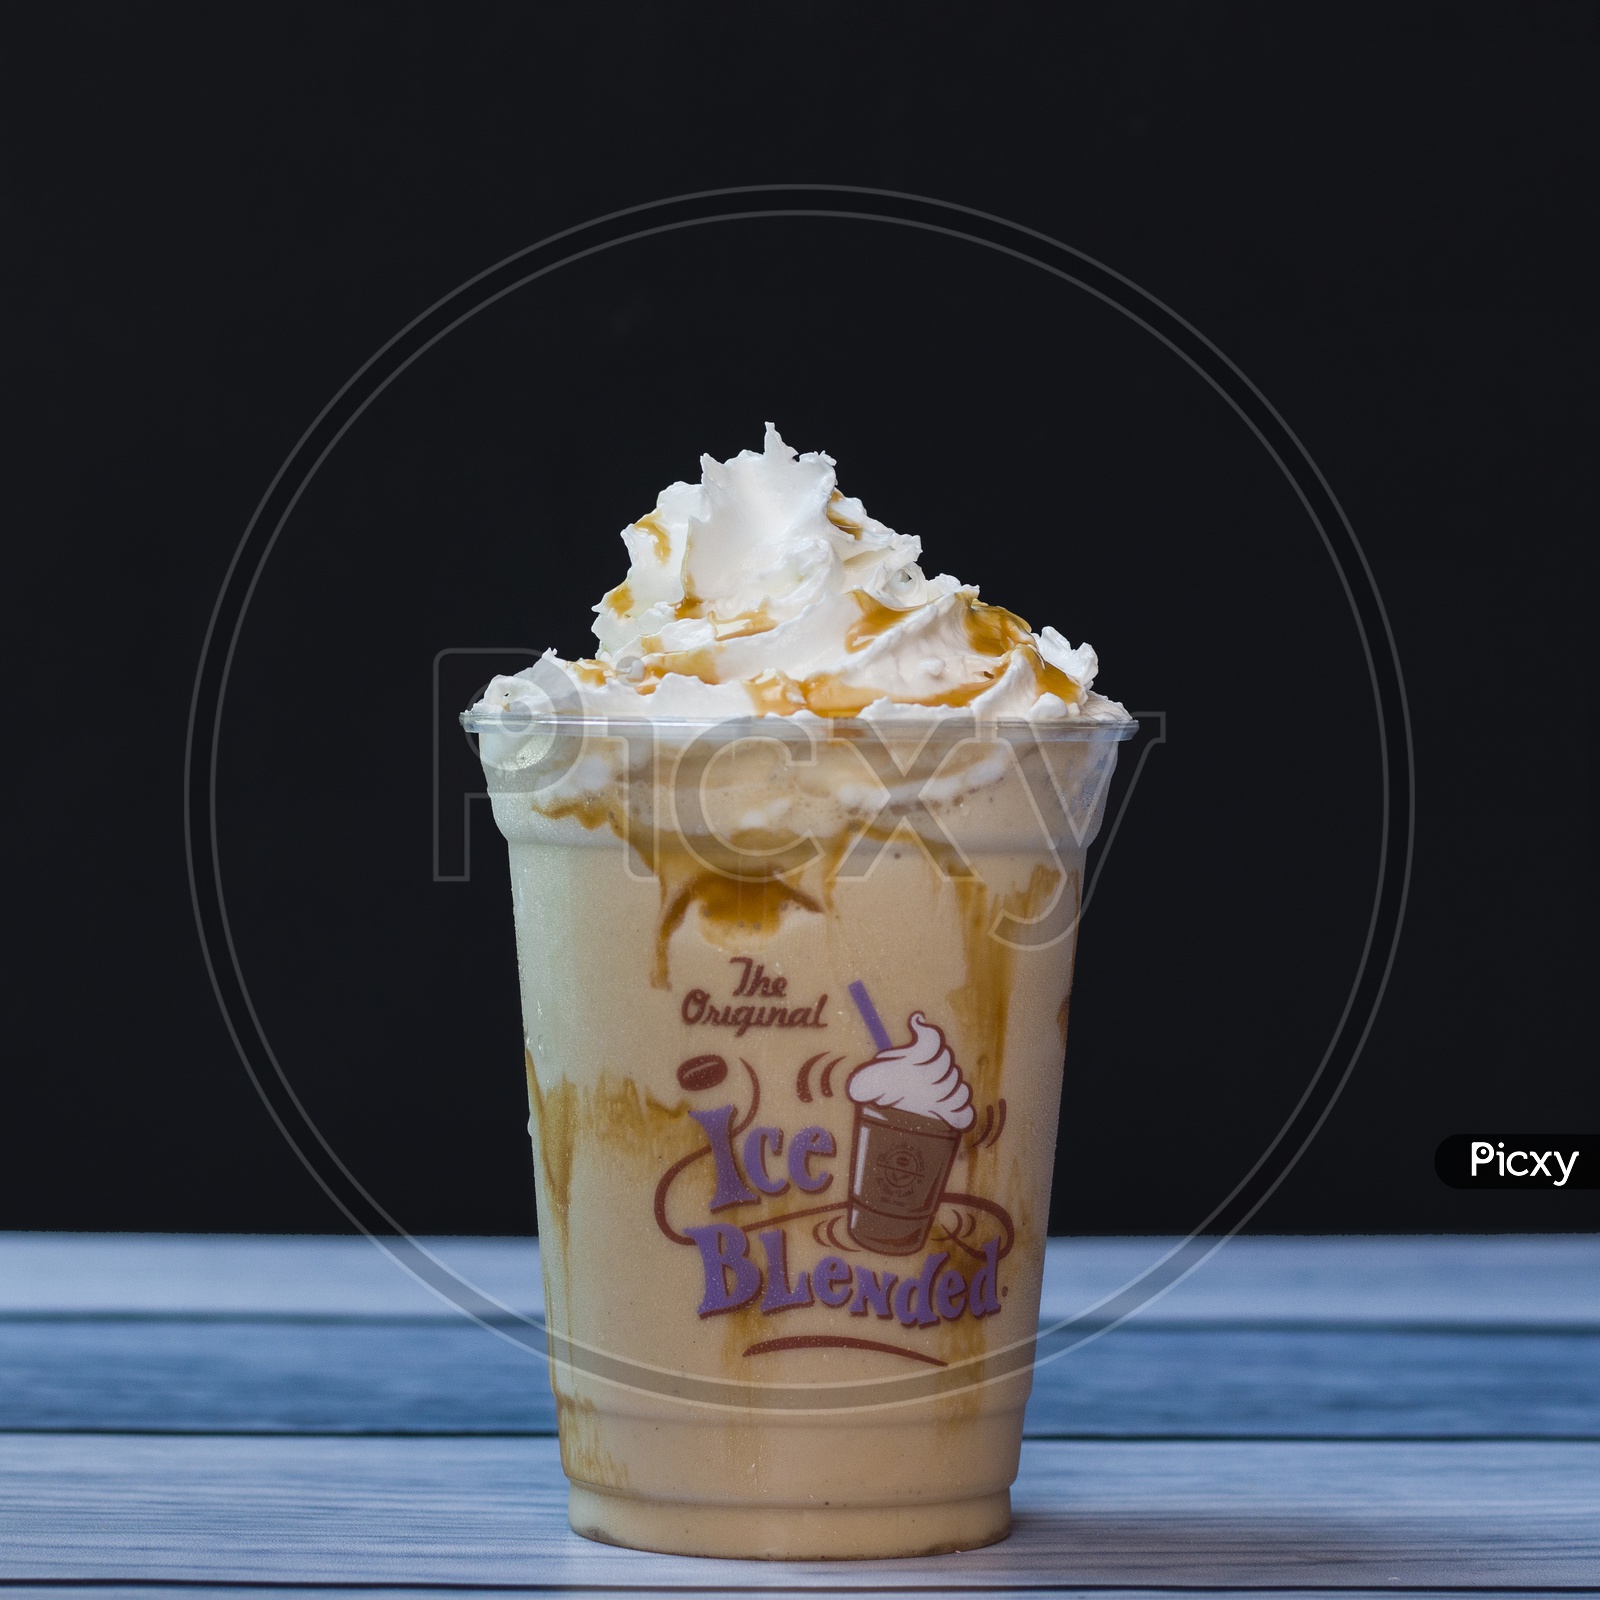 Caramel Ice Blended with Whipped Cream